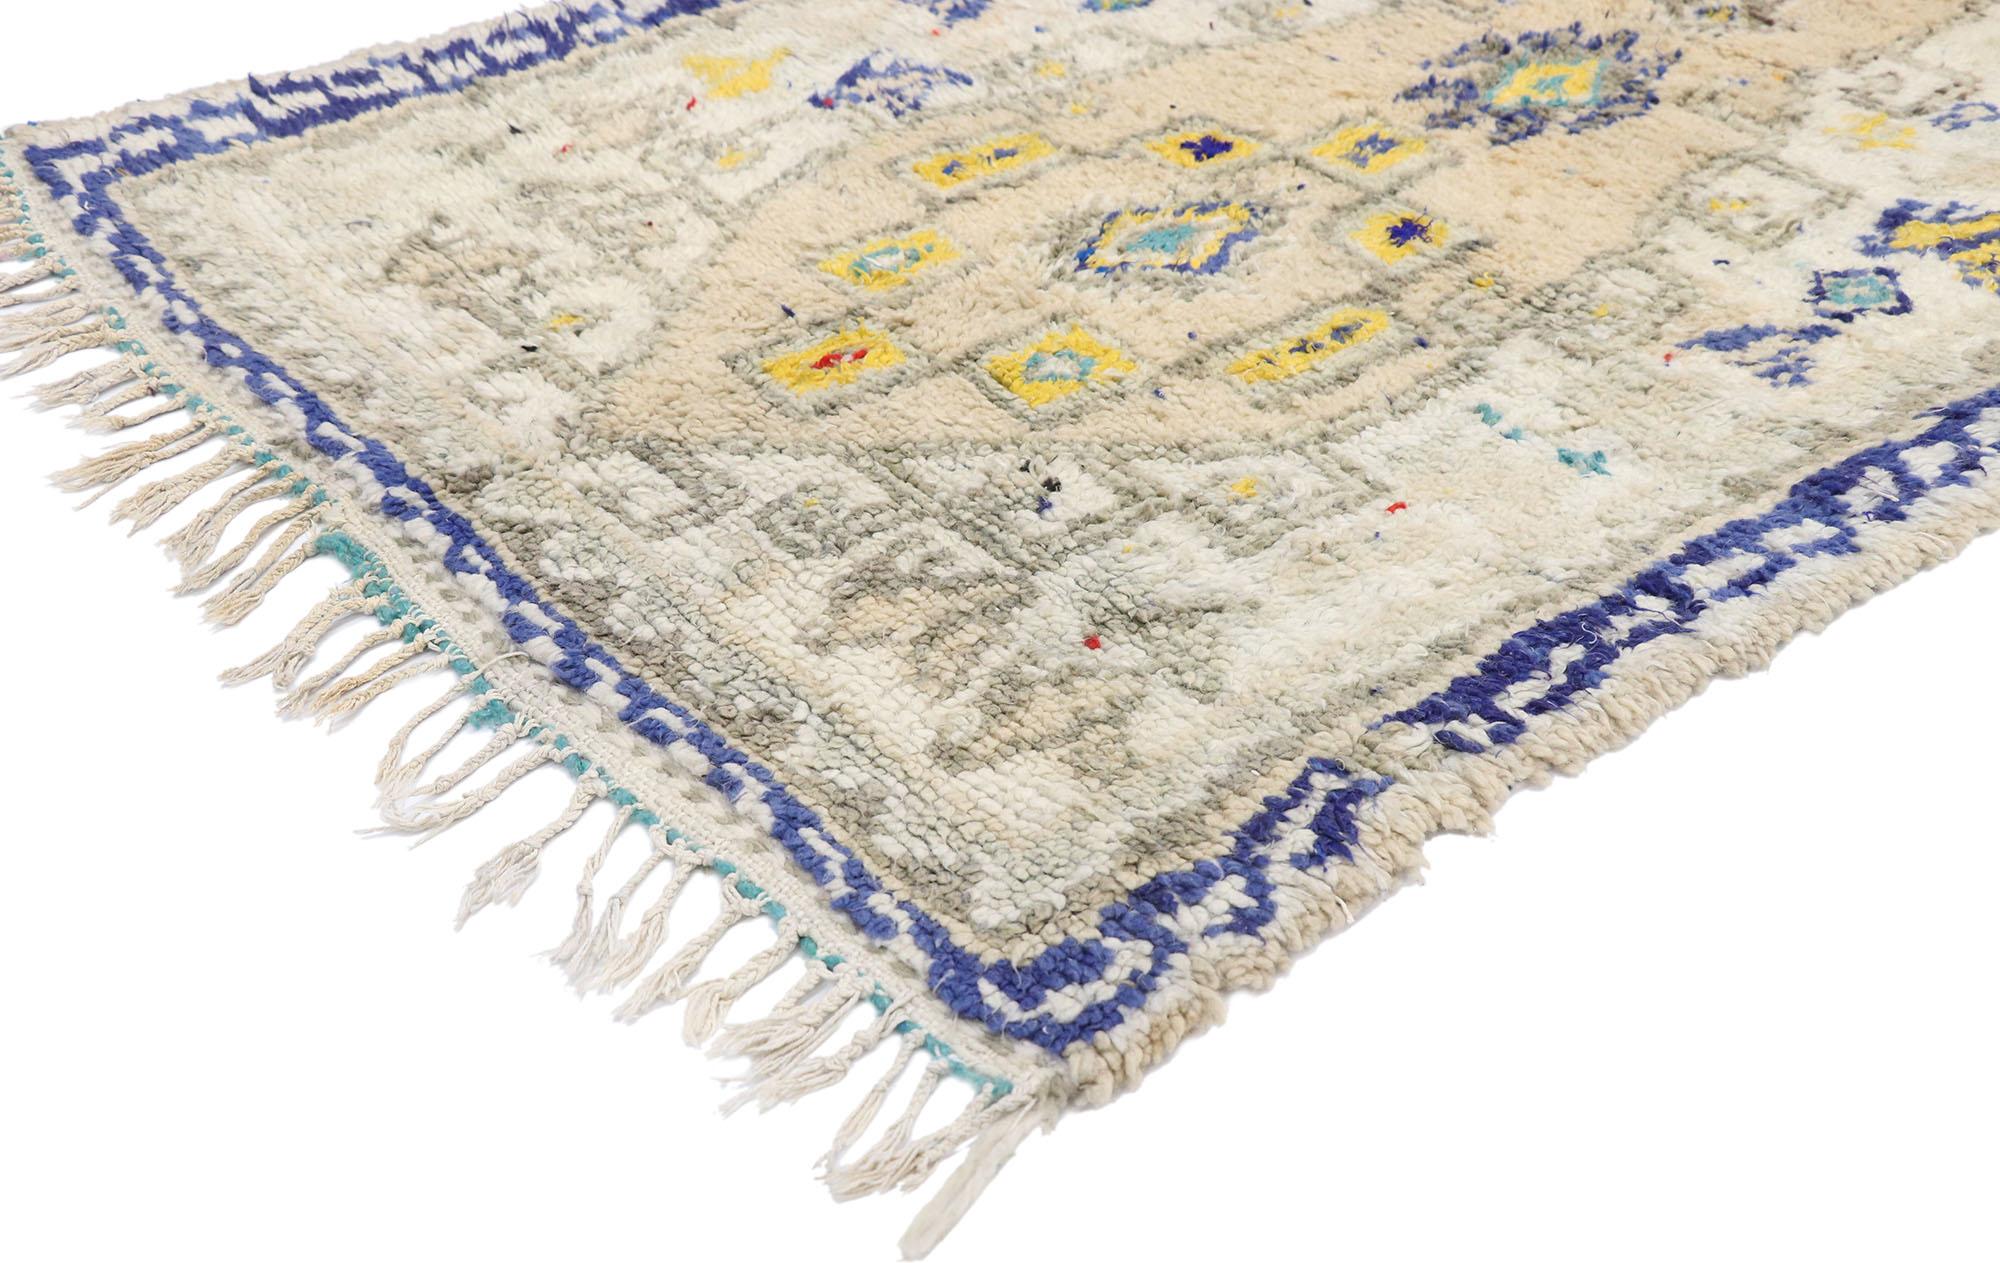 21069, vintage Berber Moroccan Azilal rug with boho chic Hygge style and Memphis design 03'06 x 06'02. Softer yet no less striking, this hand knotted wool vintage Berber Moroccan rug features an abrashed beige field covered with various ambiguous